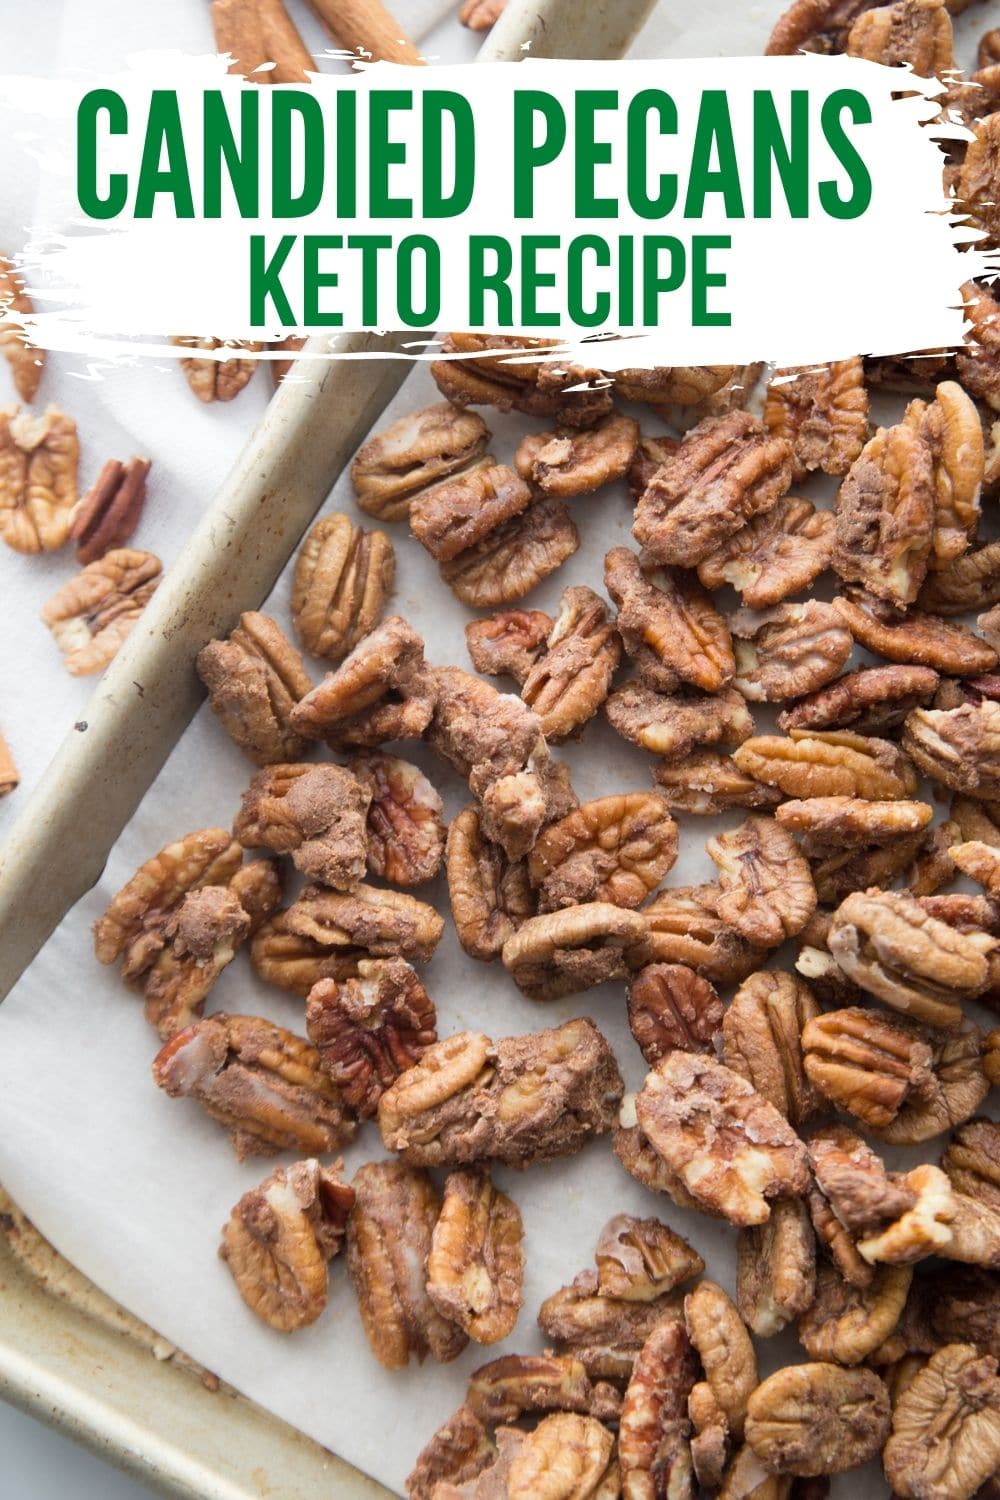 Keto Image of Candied Pecans Meal 